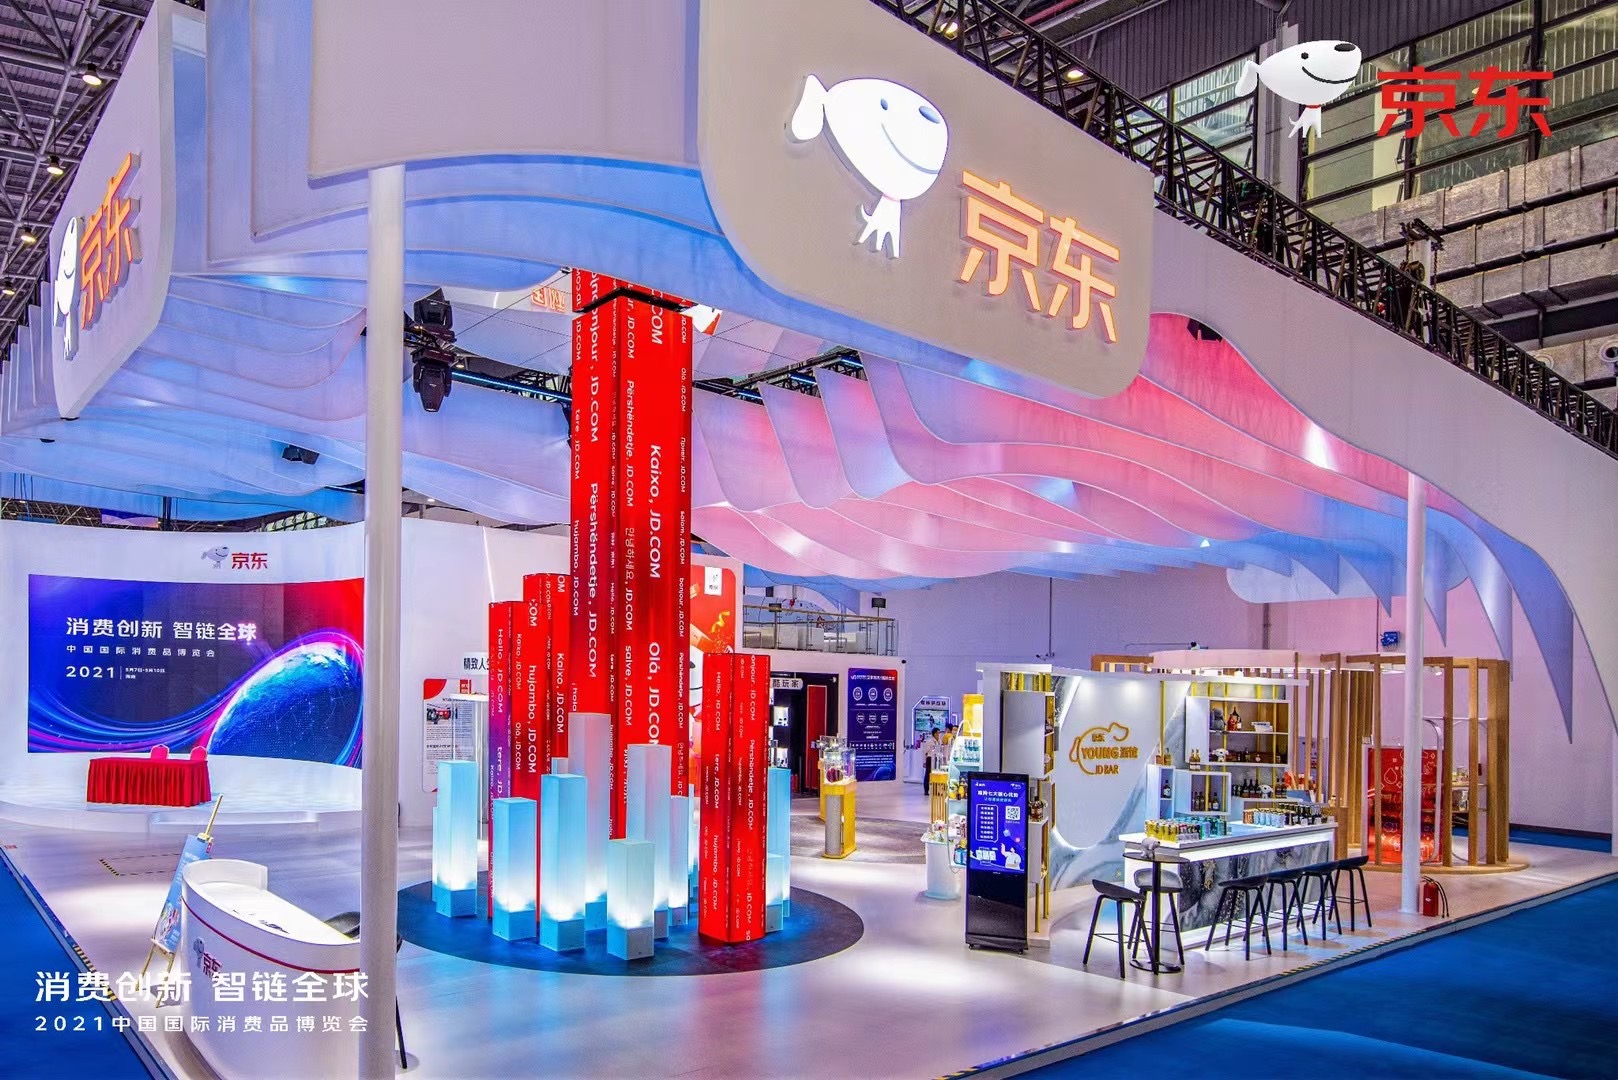 JD.com, has an exhibition booth in partnership with top brands from around the world, as well as a range of events and initiatives to take place during the expo.